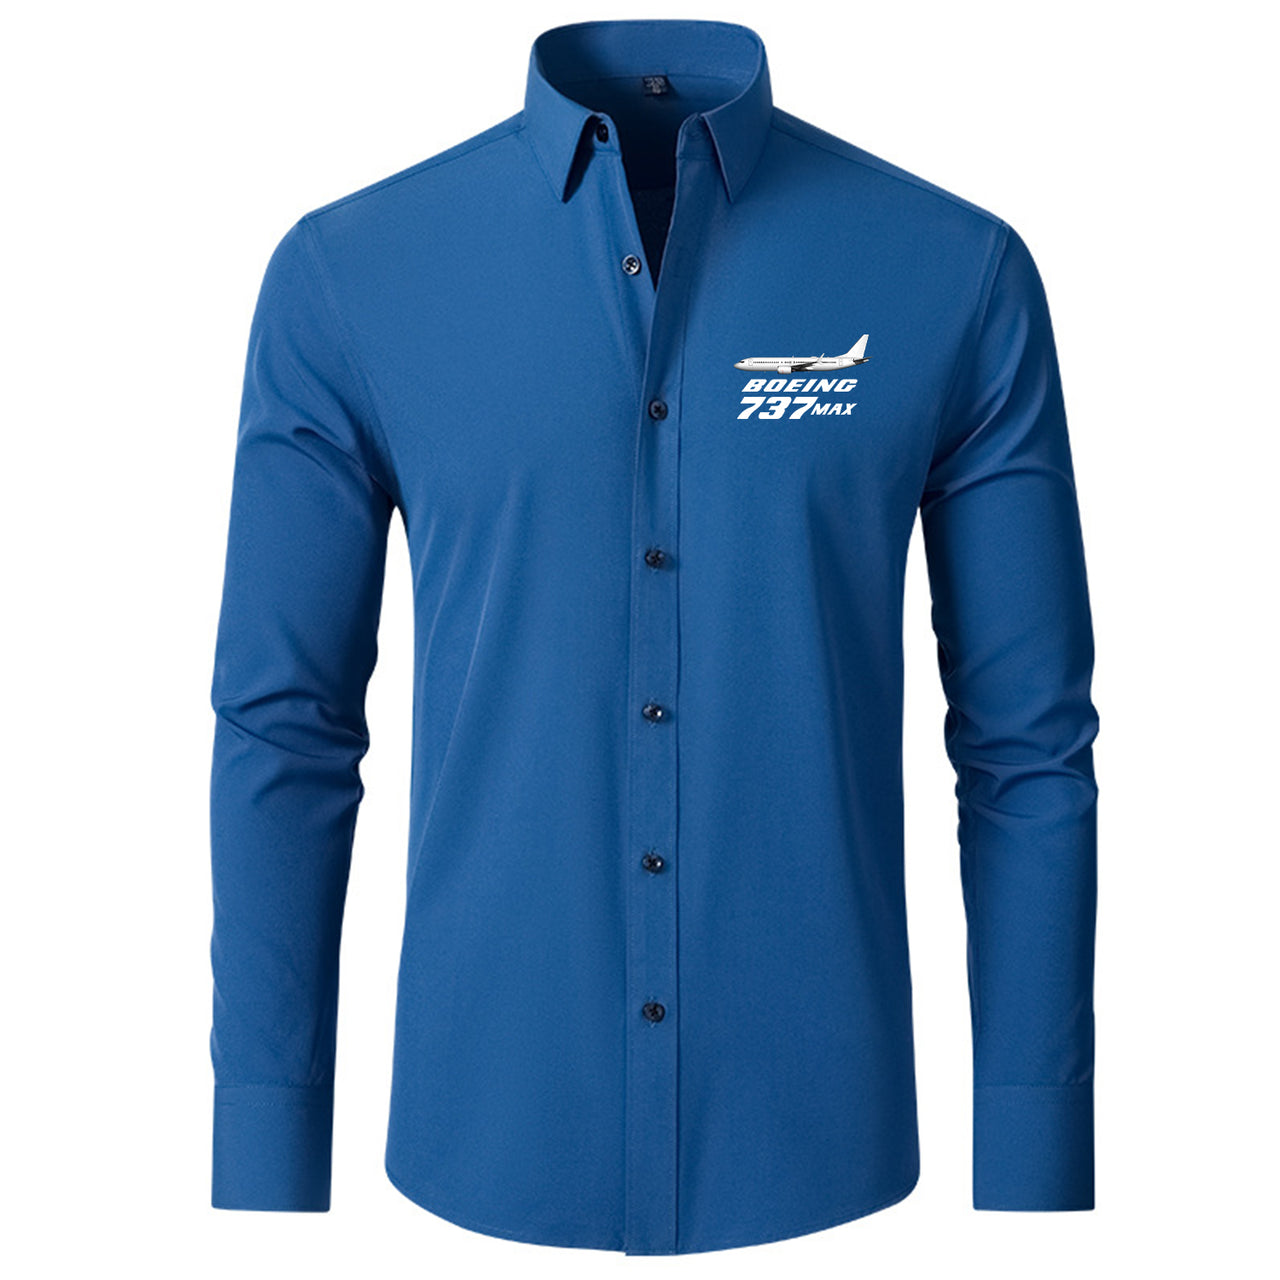 The Boeing 737Max Designed Long Sleeve Shirts